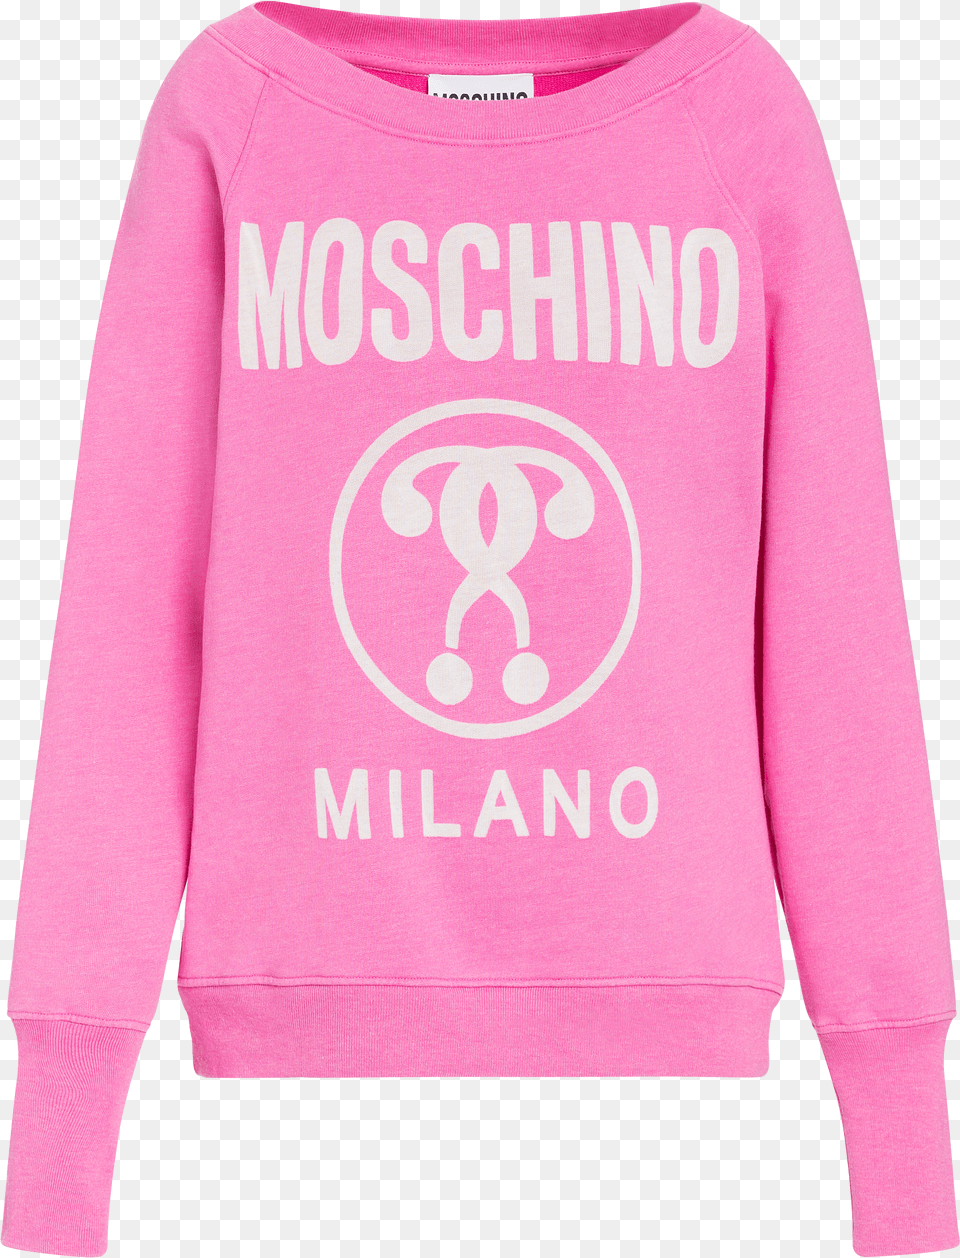 Moschino Black And Red Sweatshirt Free Transparent Png